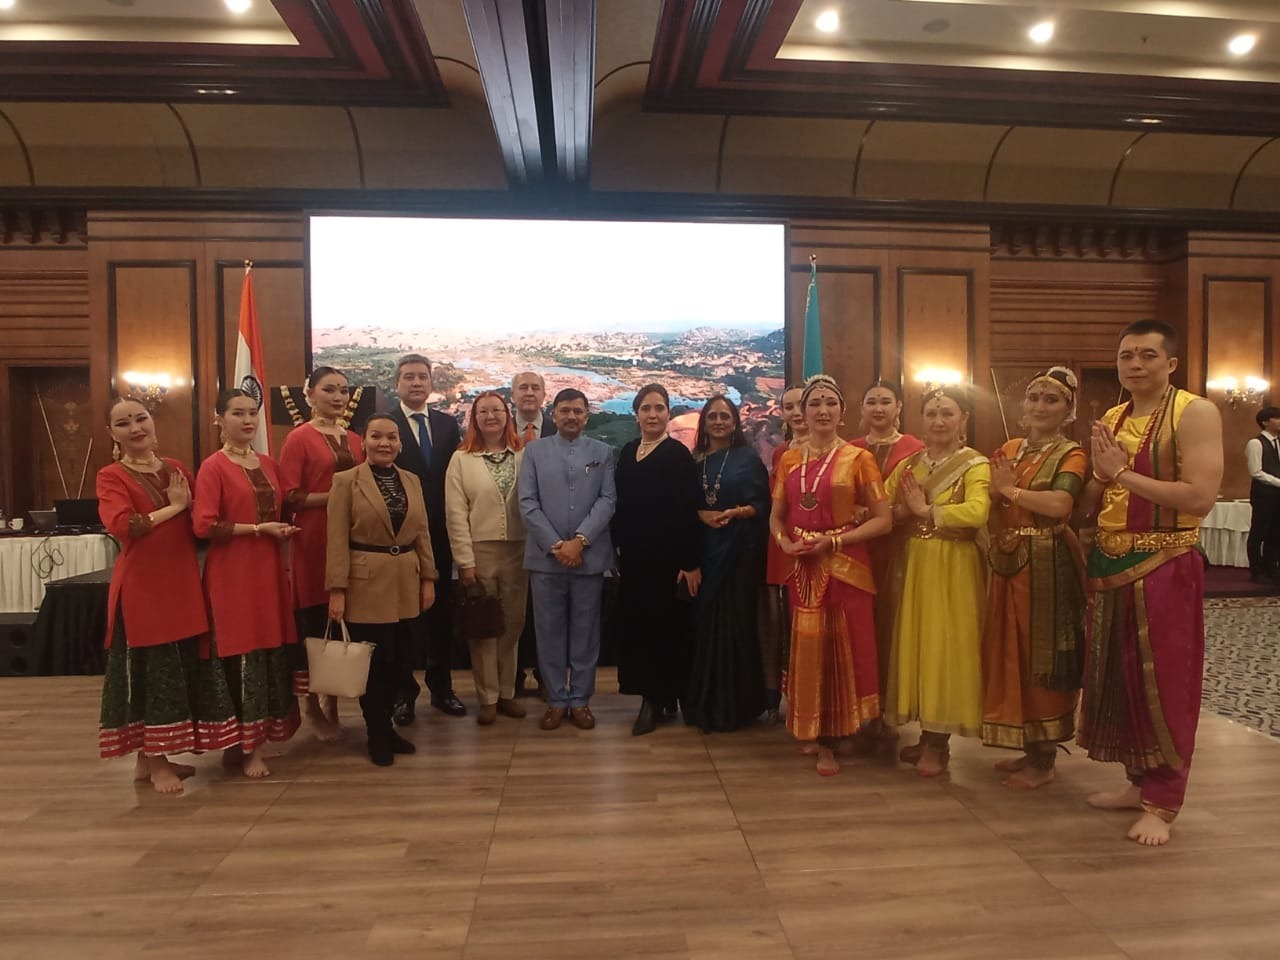 Republic Day of India celebration was held in Almaty